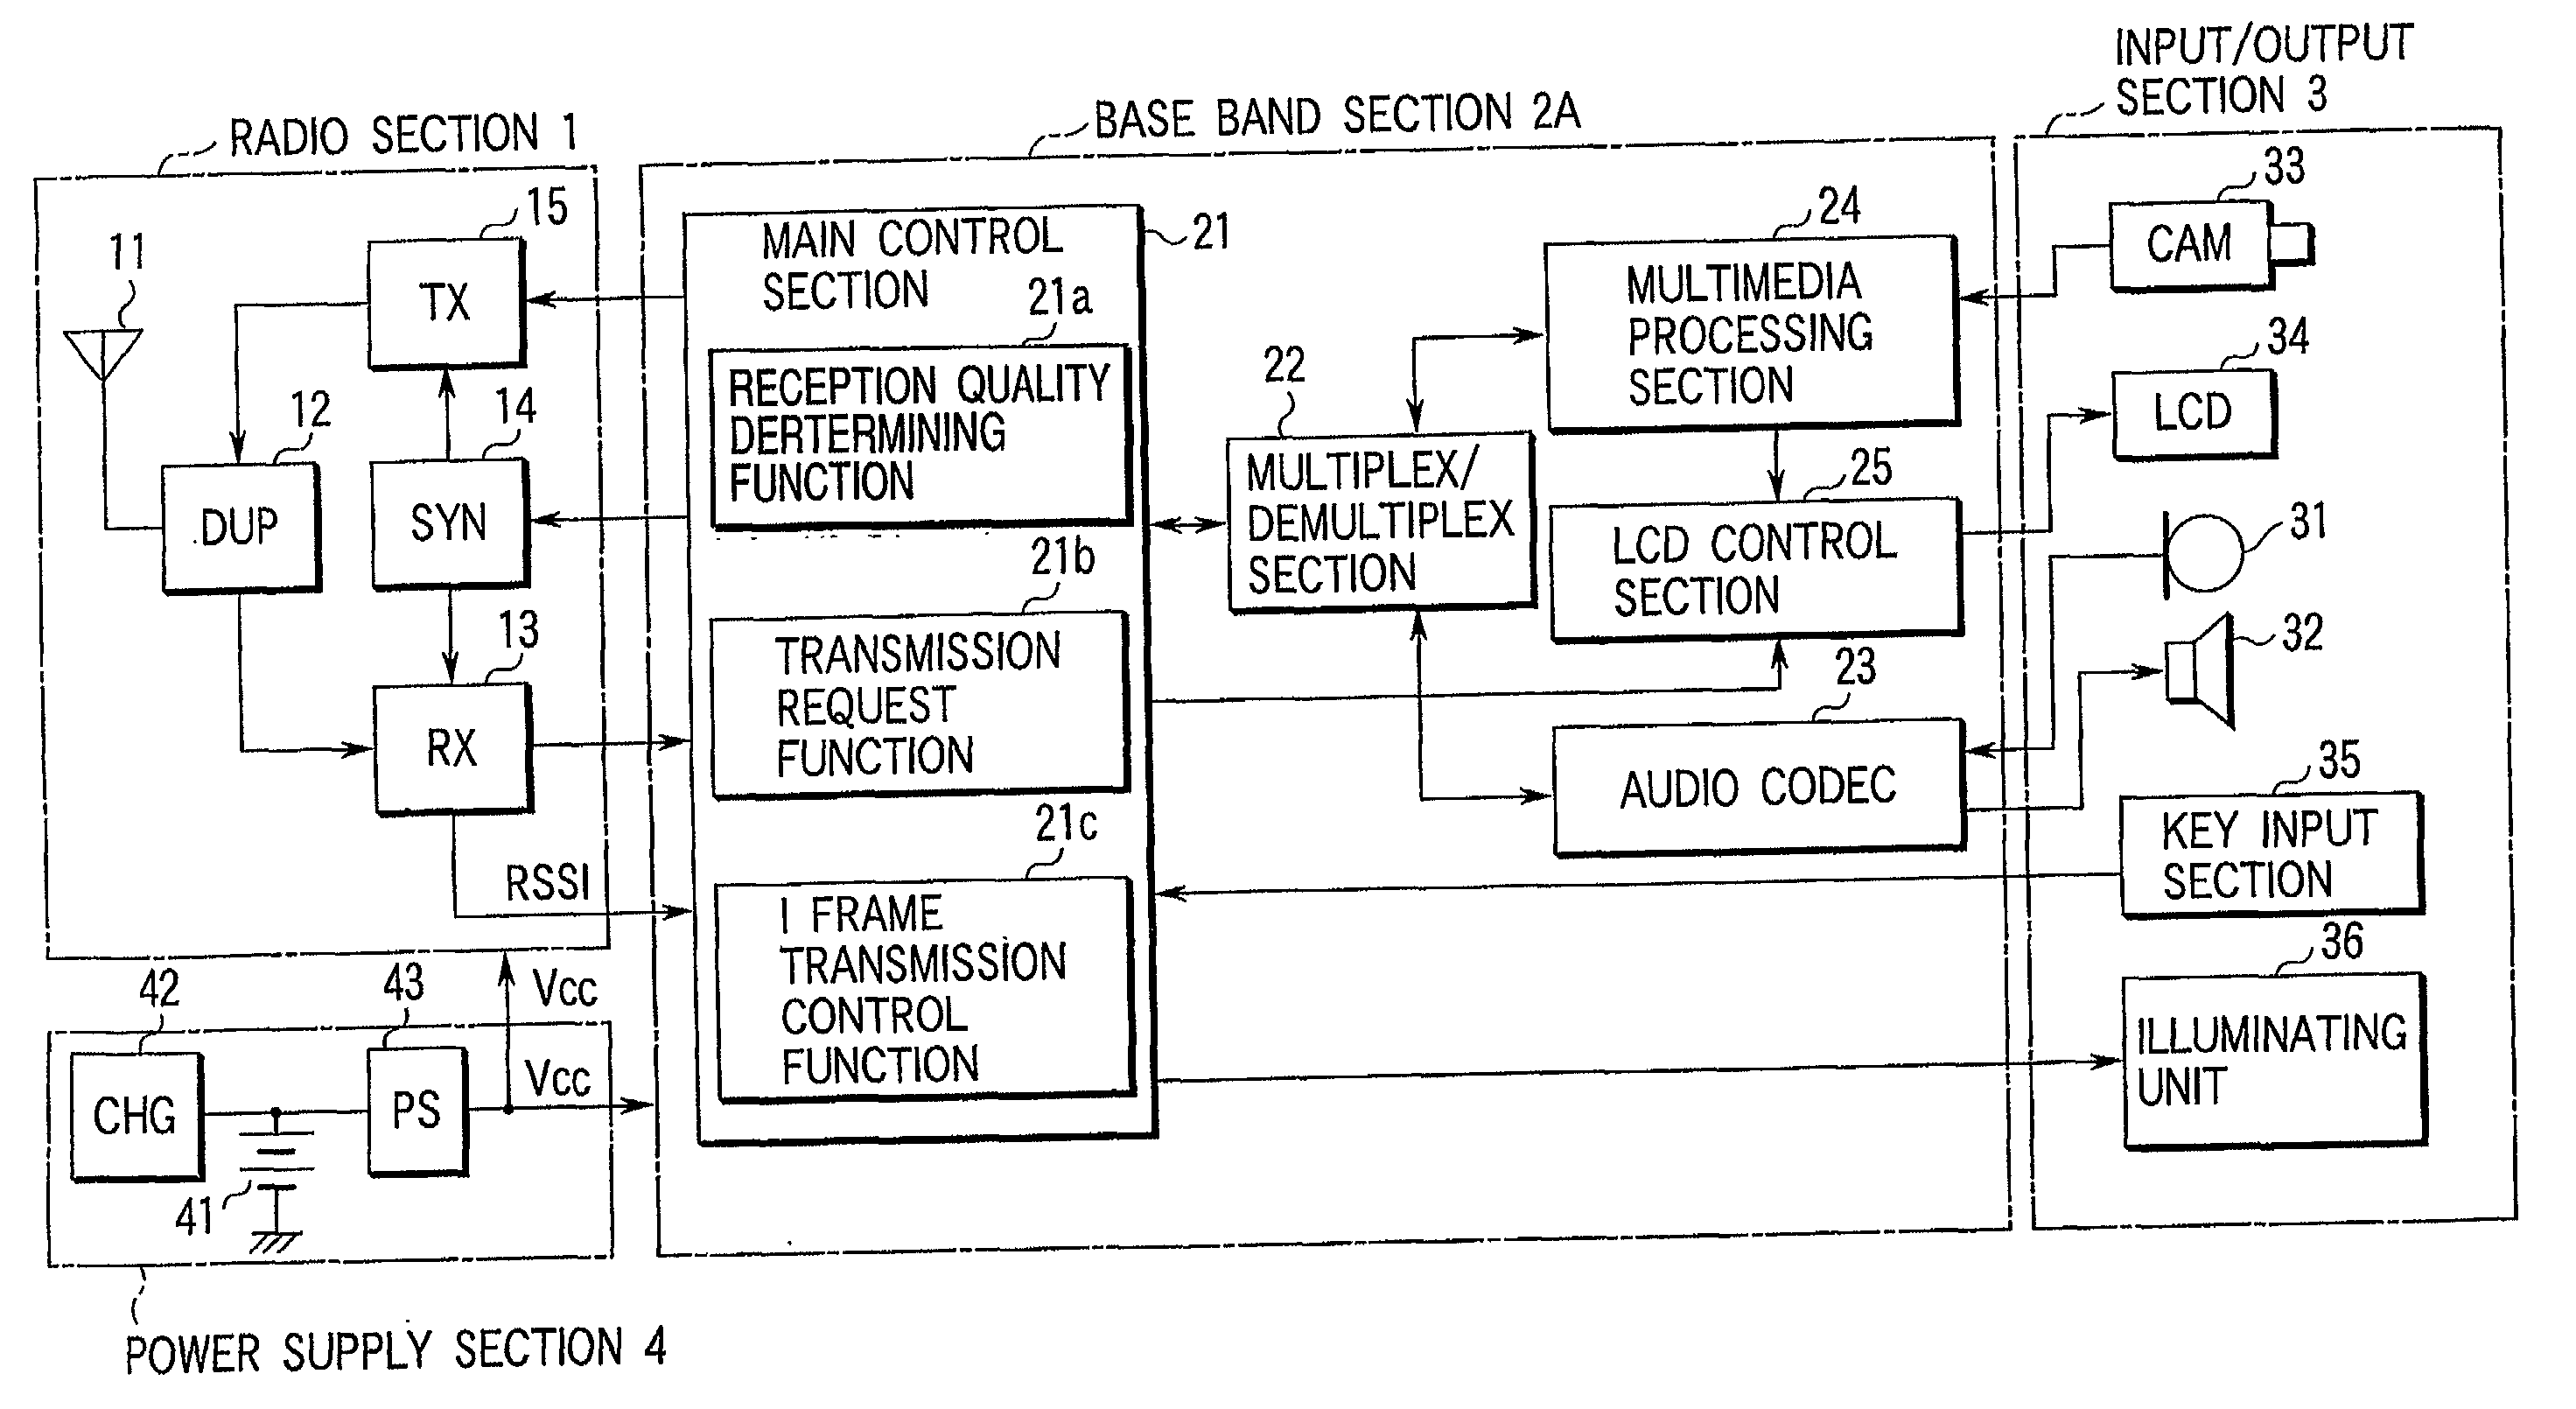 Data transmission system and communication devices